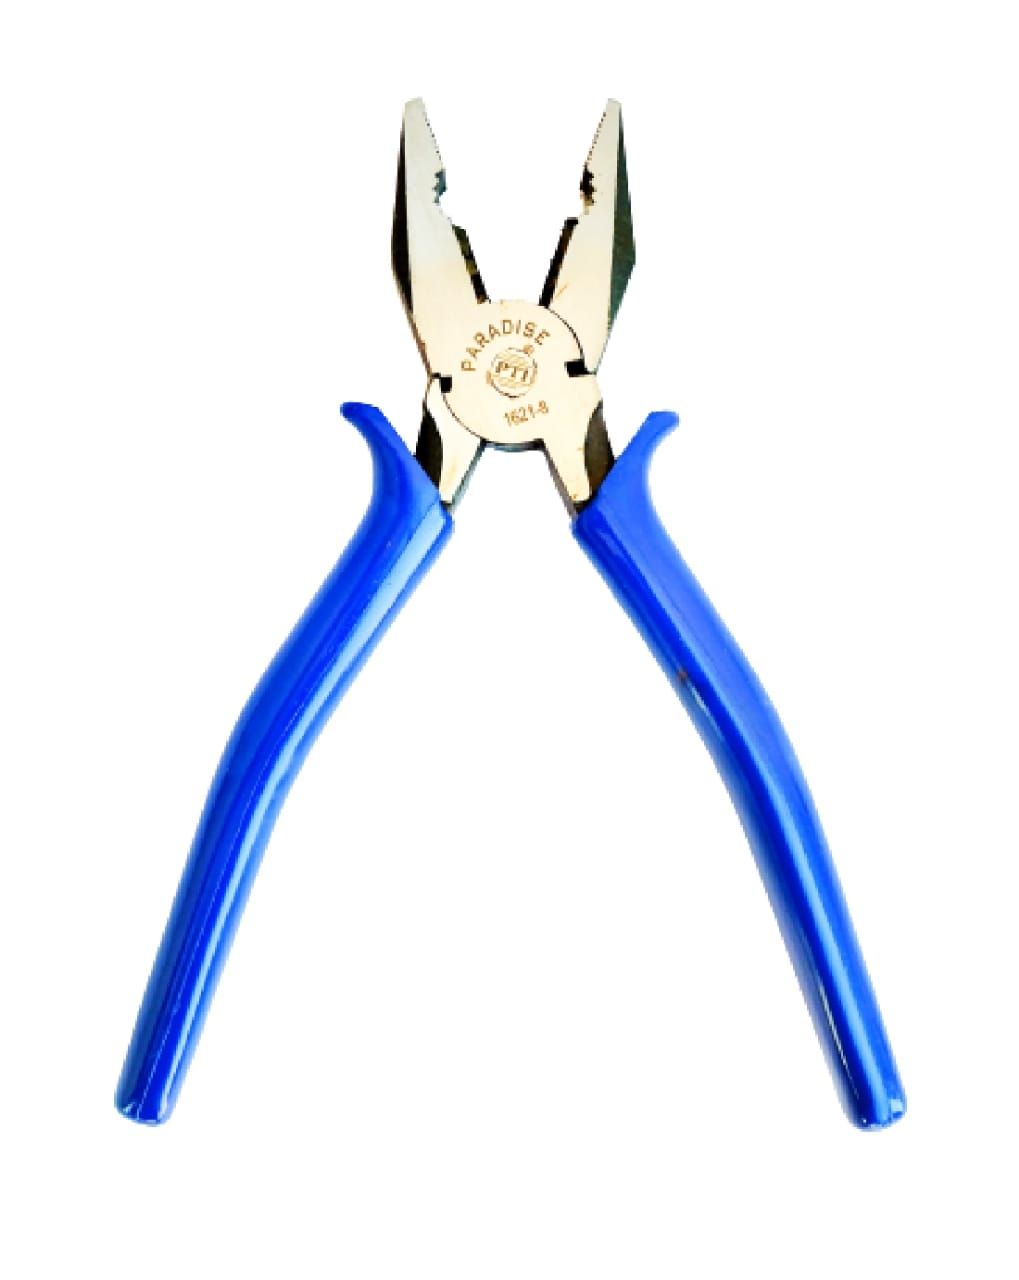 PILERMAN Sturdy Steel Combination Plier 8-inch for Home & Professional Use and Electrical Work (1621-8-Blue)